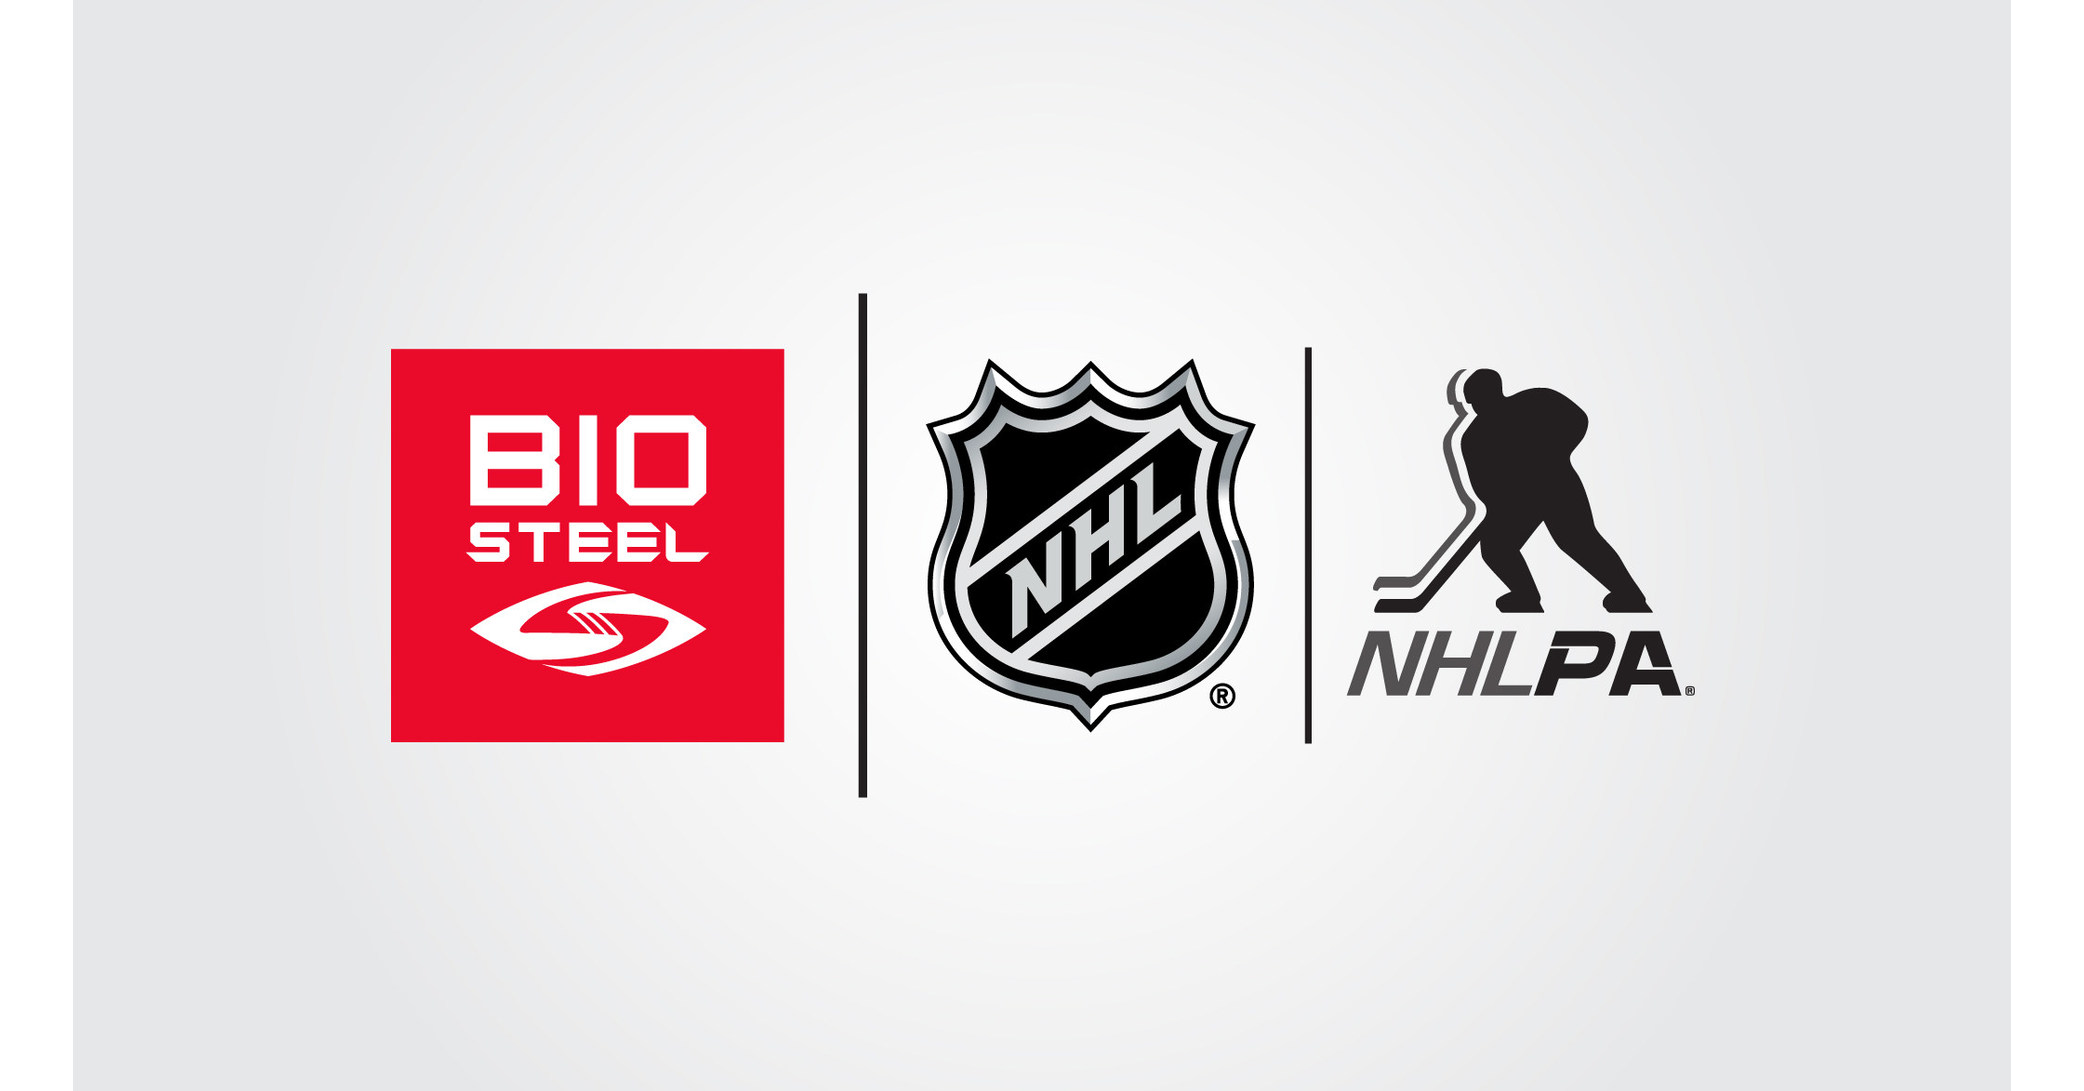 NHL Public Relations on X: NHL Creative Services developed a line